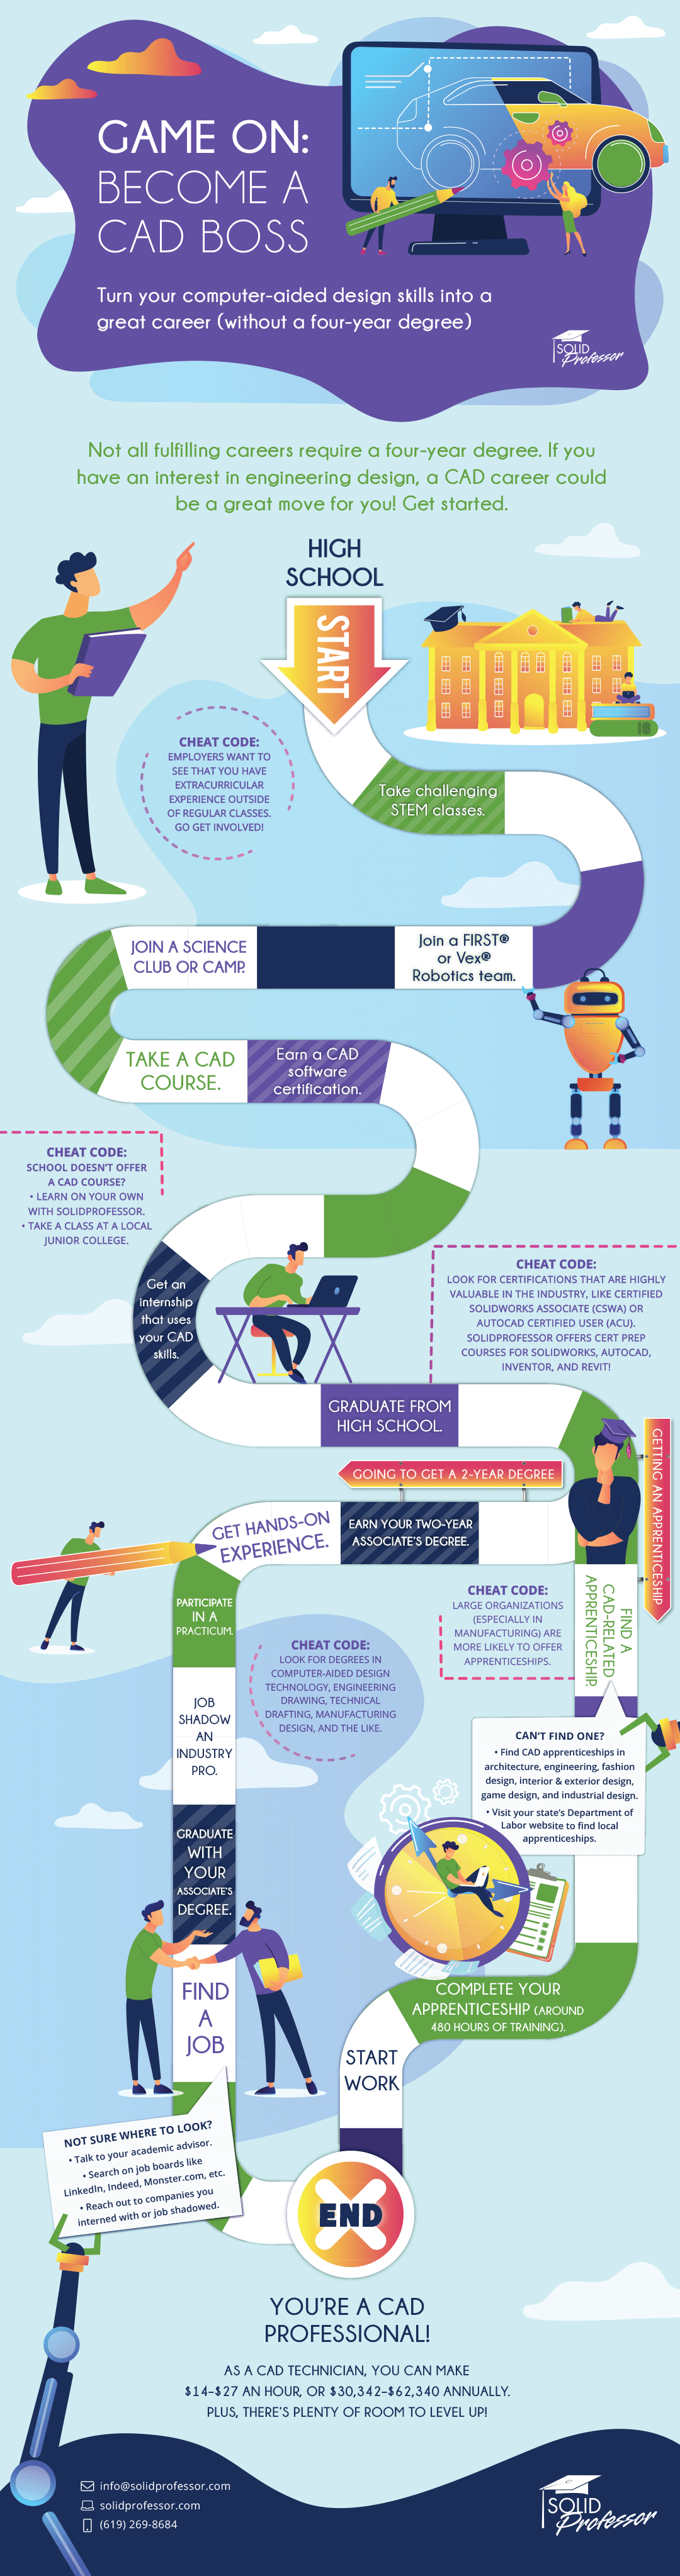 [Infographic] Become a CAD Boss